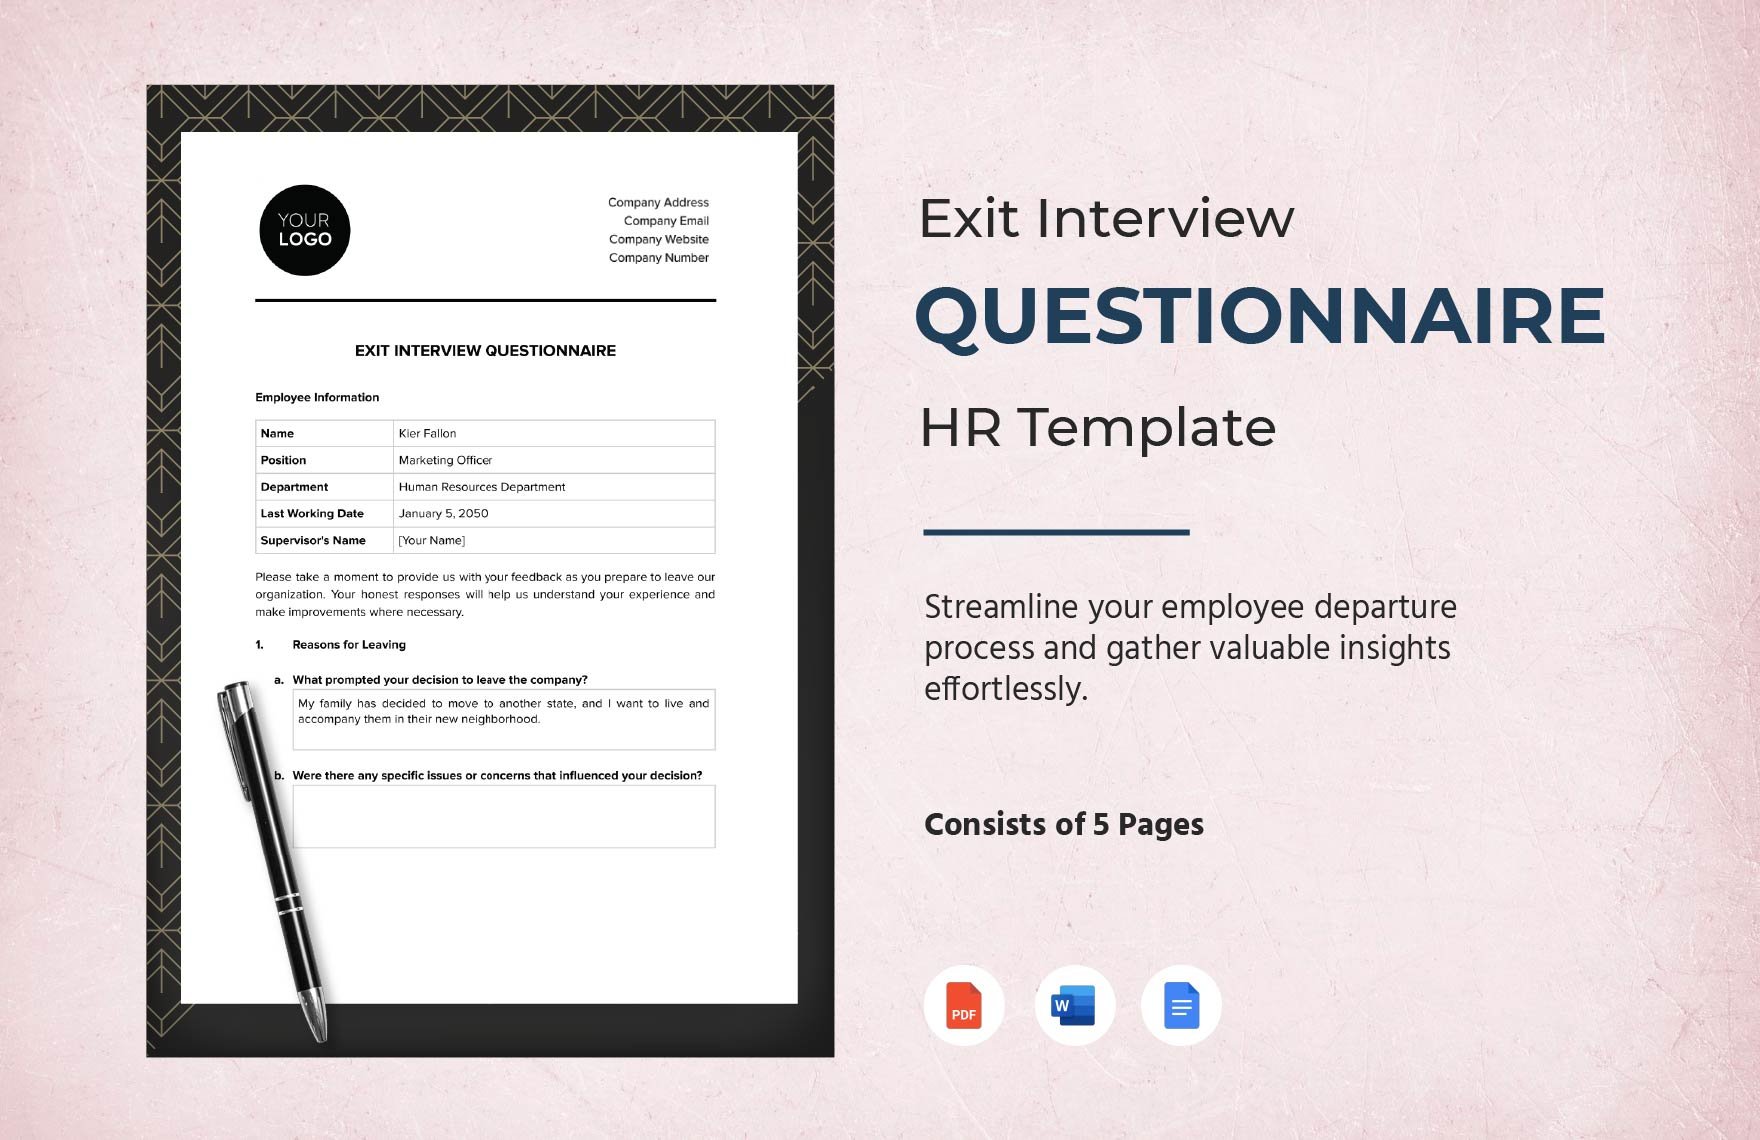 Exit Interview Questionnaire HR Template in Word, Google Docs, PDF